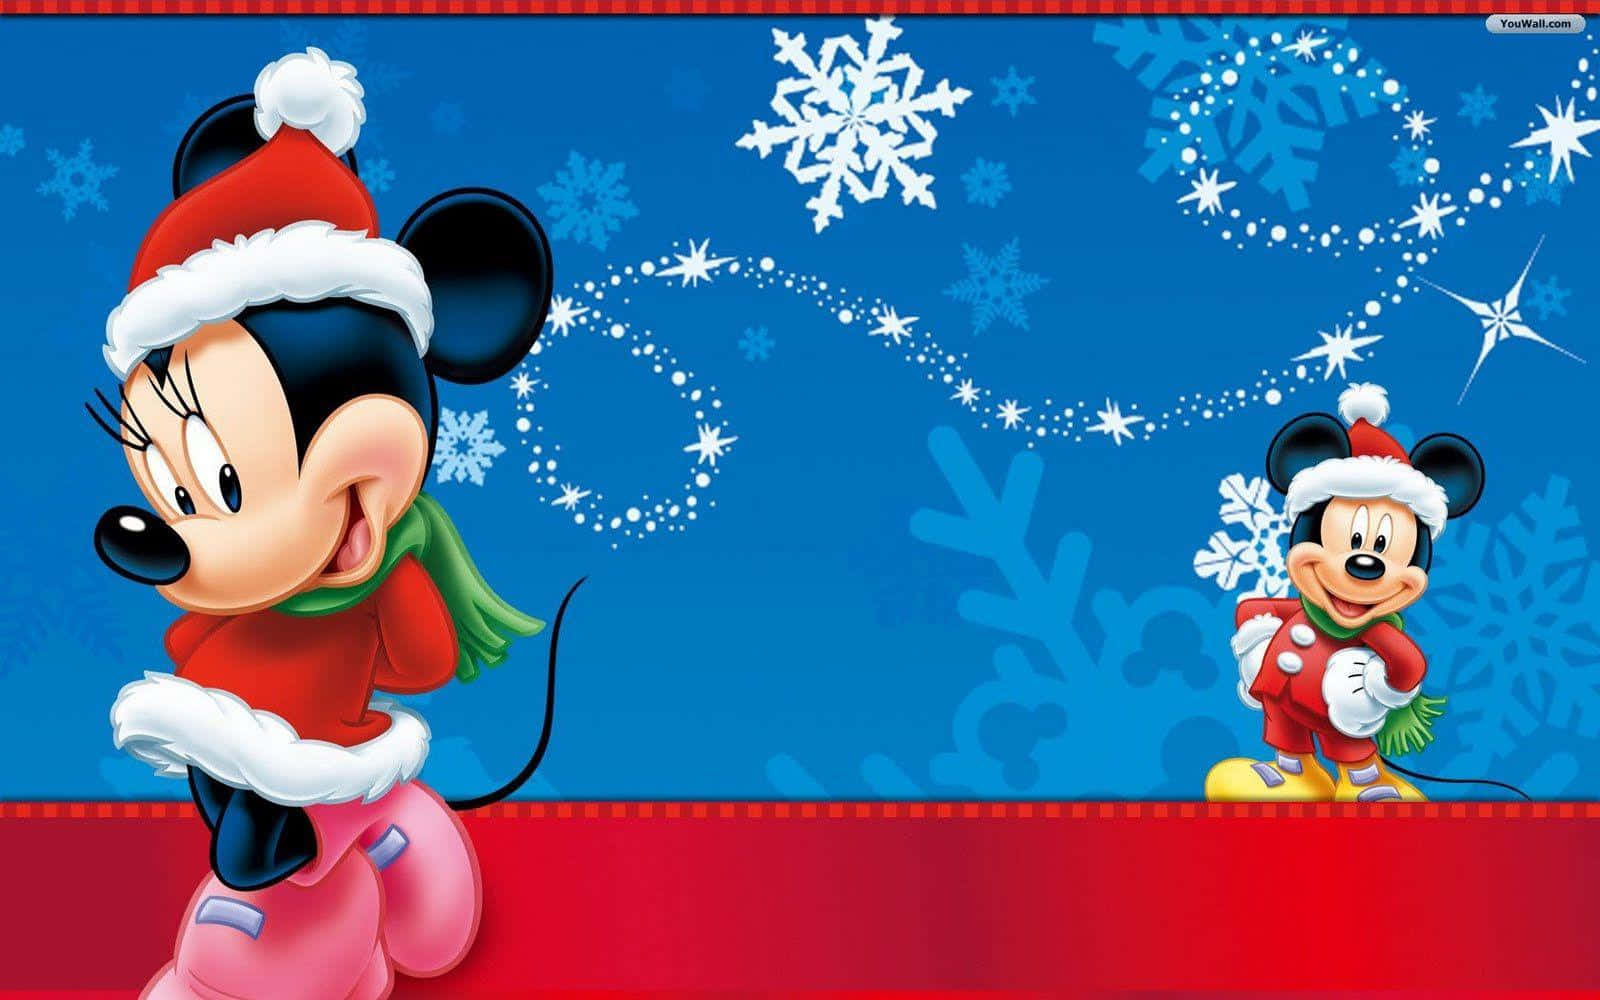 Celebrate the Holidays with your Favorite Disney Characters